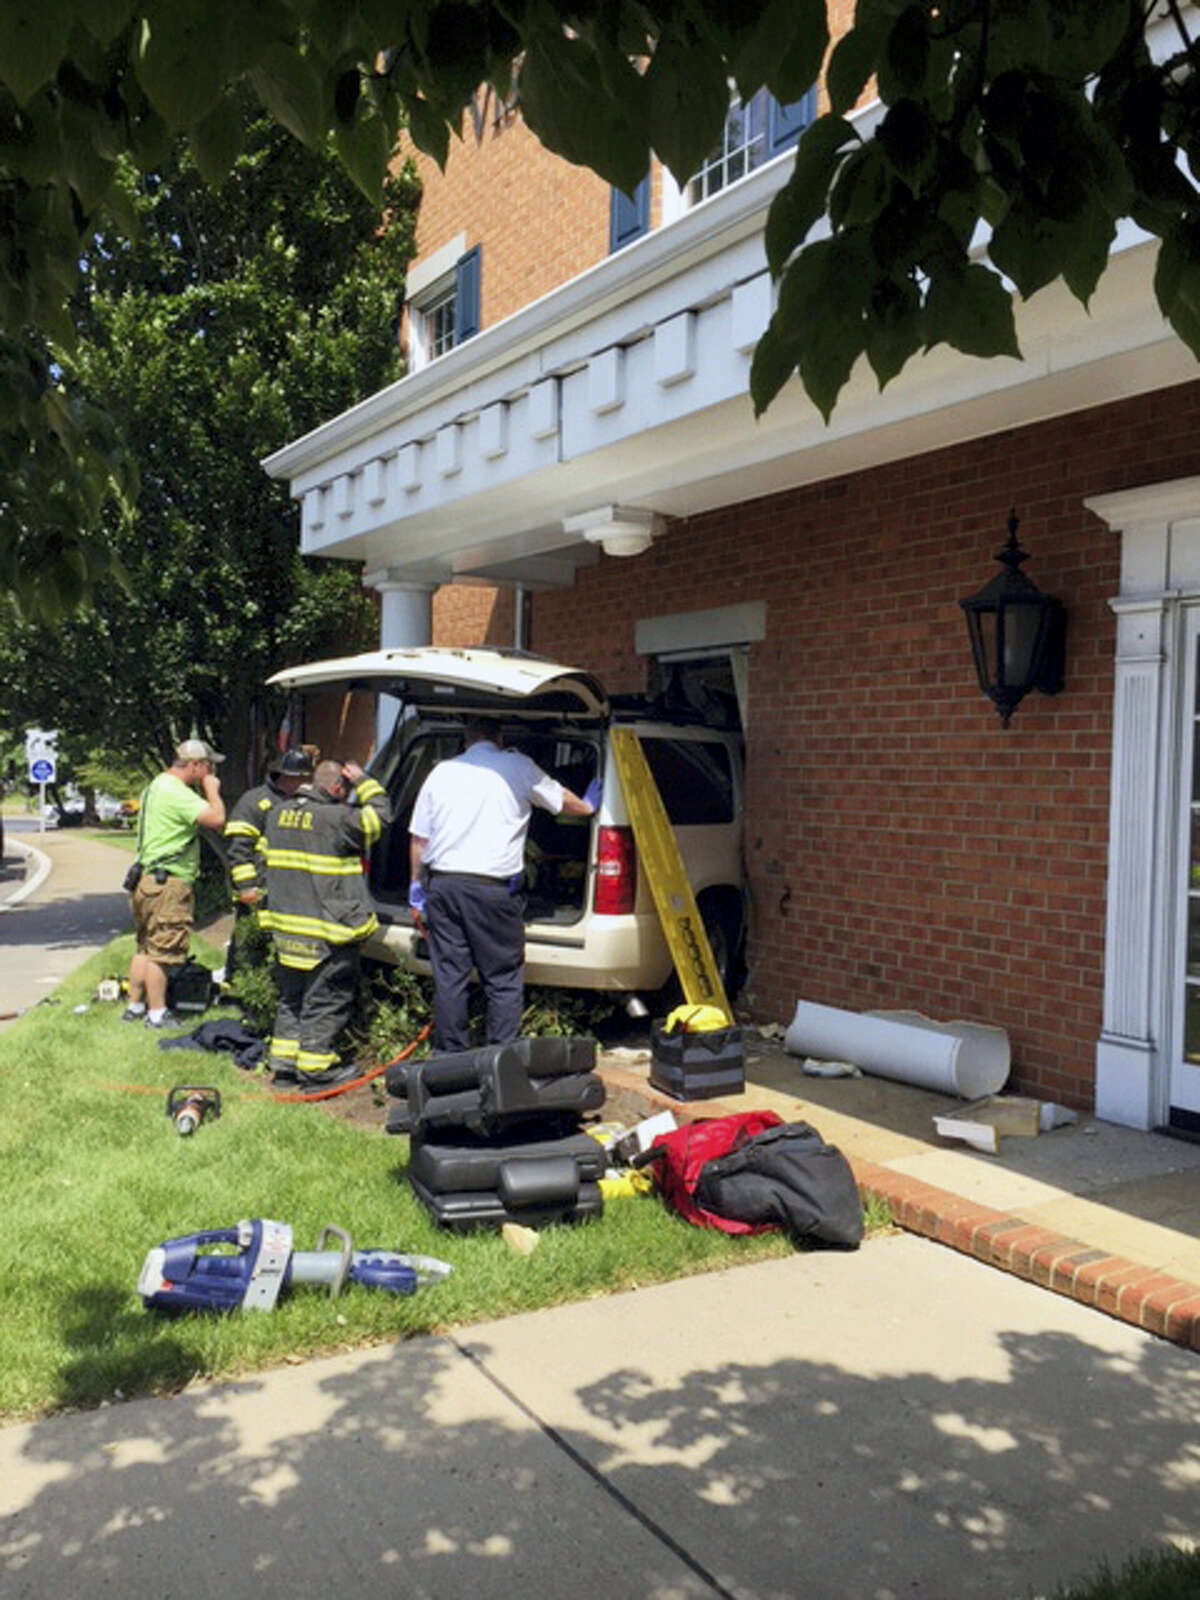 First responders work at the scene of an automobile accident in Red Bank, N.J. Former Red Sox and Mets infielder John Valentin and his mother were injured when the SUV he was driving crashed into the building used by Visiting Nurse Association.